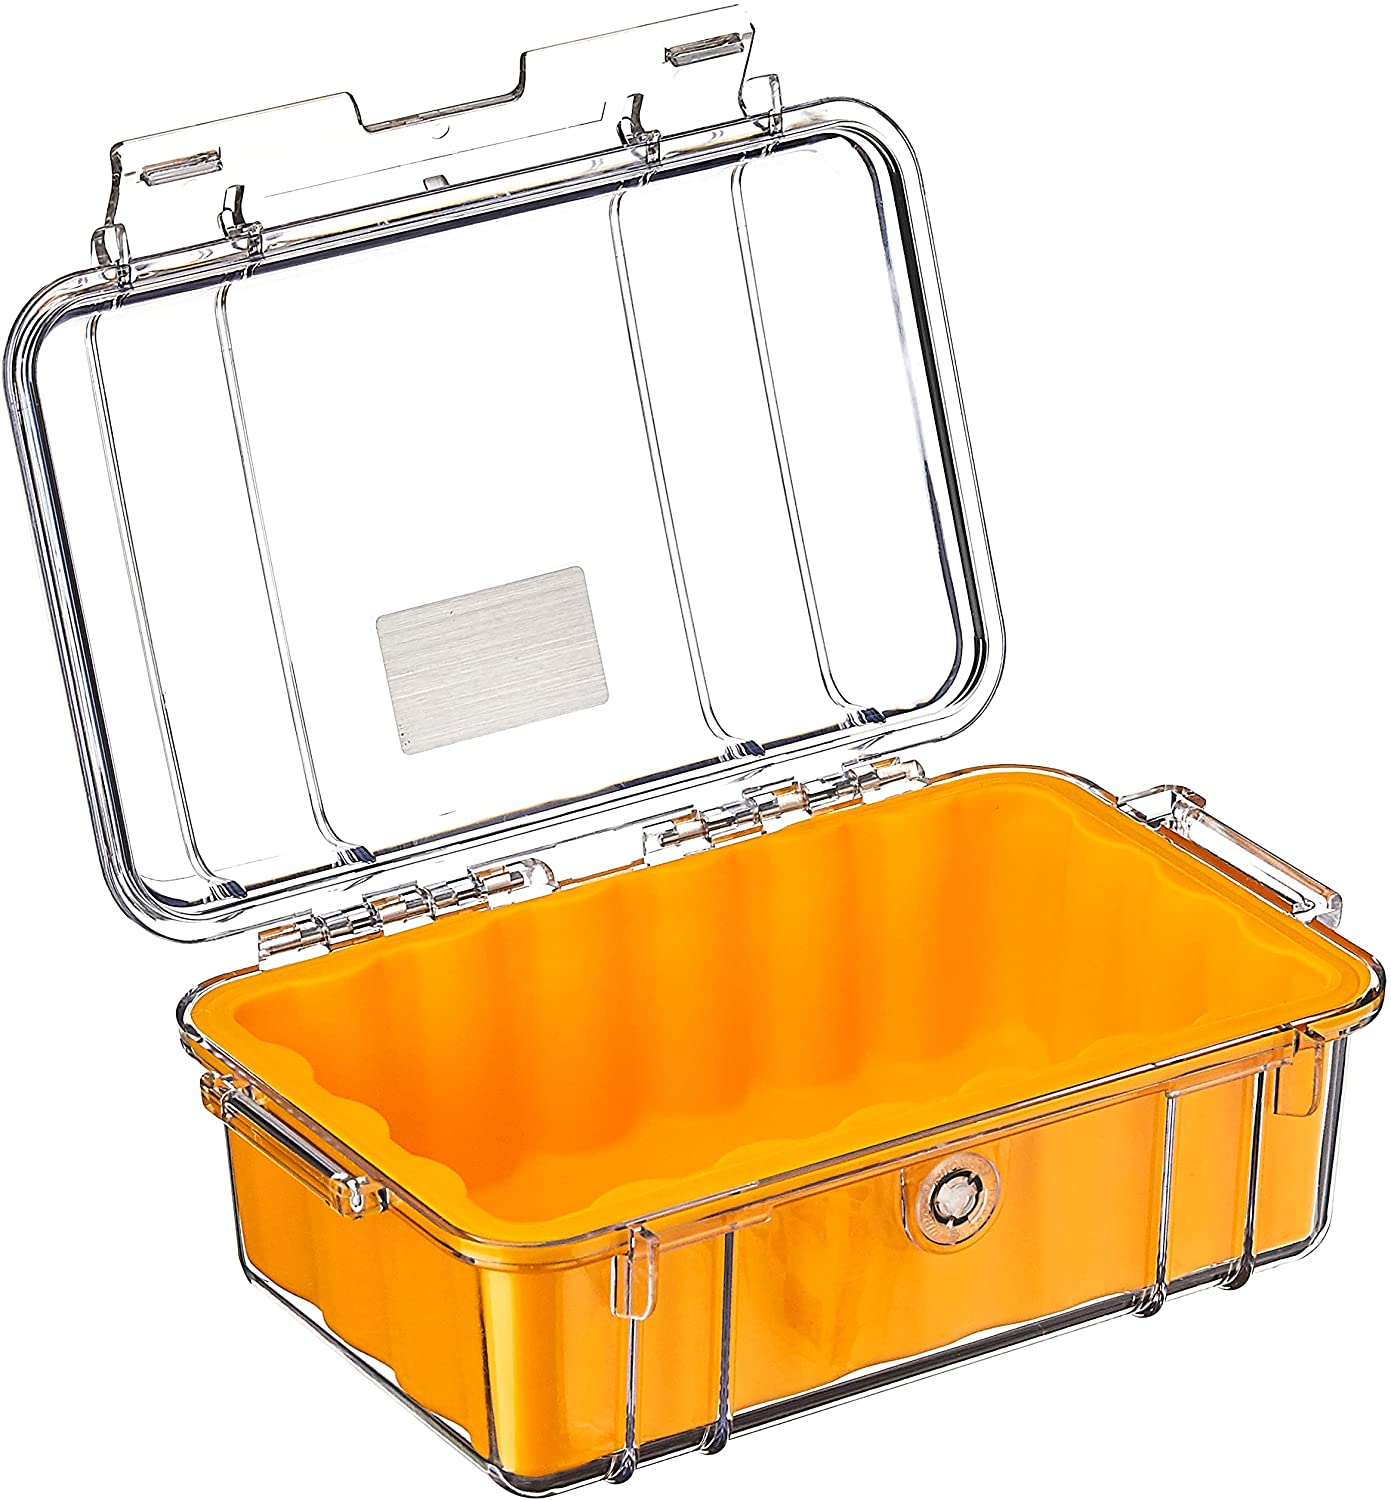 Pelican 1050 Clear Micro Case Waterproof Shockproof Dustproof Hard Casing with Automatic Pressure Purge Valve for Phones, MP3 Player, Small Electronics (4 Colors Available)